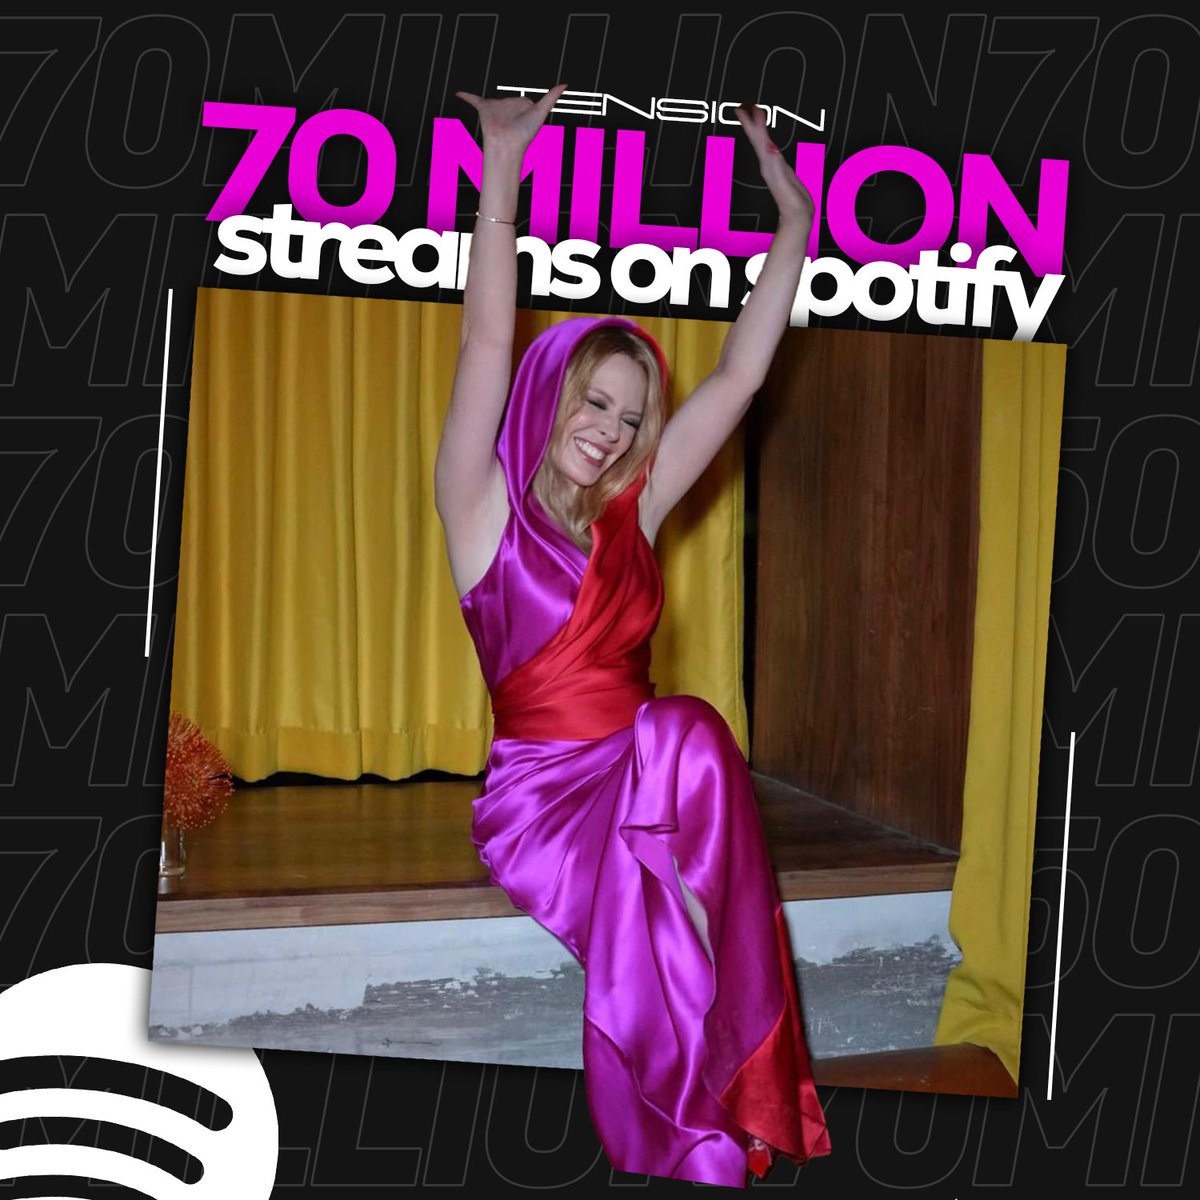 Three weeks before its full release, the ‘Tension’ album has already surpassed 70 MILLION streams on Spotify. Congrats @kylieminogue!